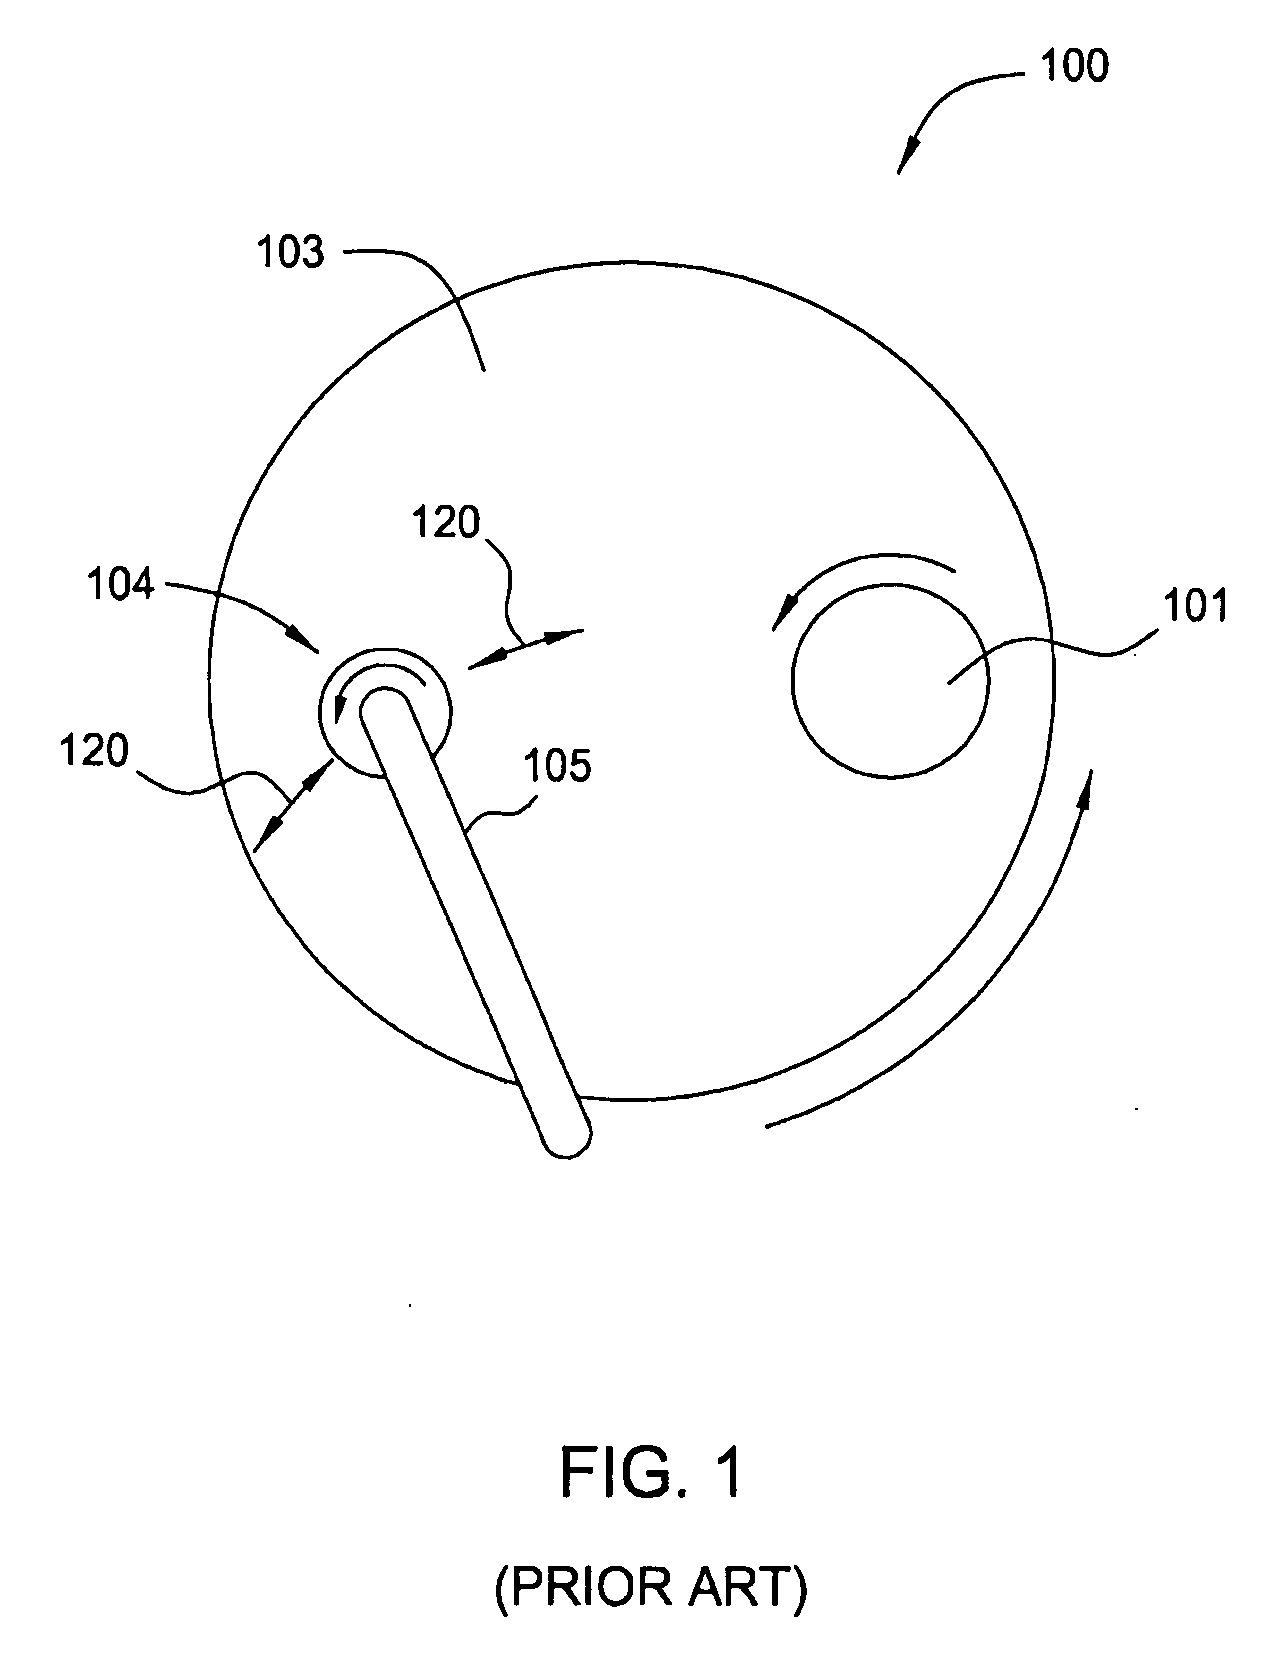 Method for conditioning a polishing pad